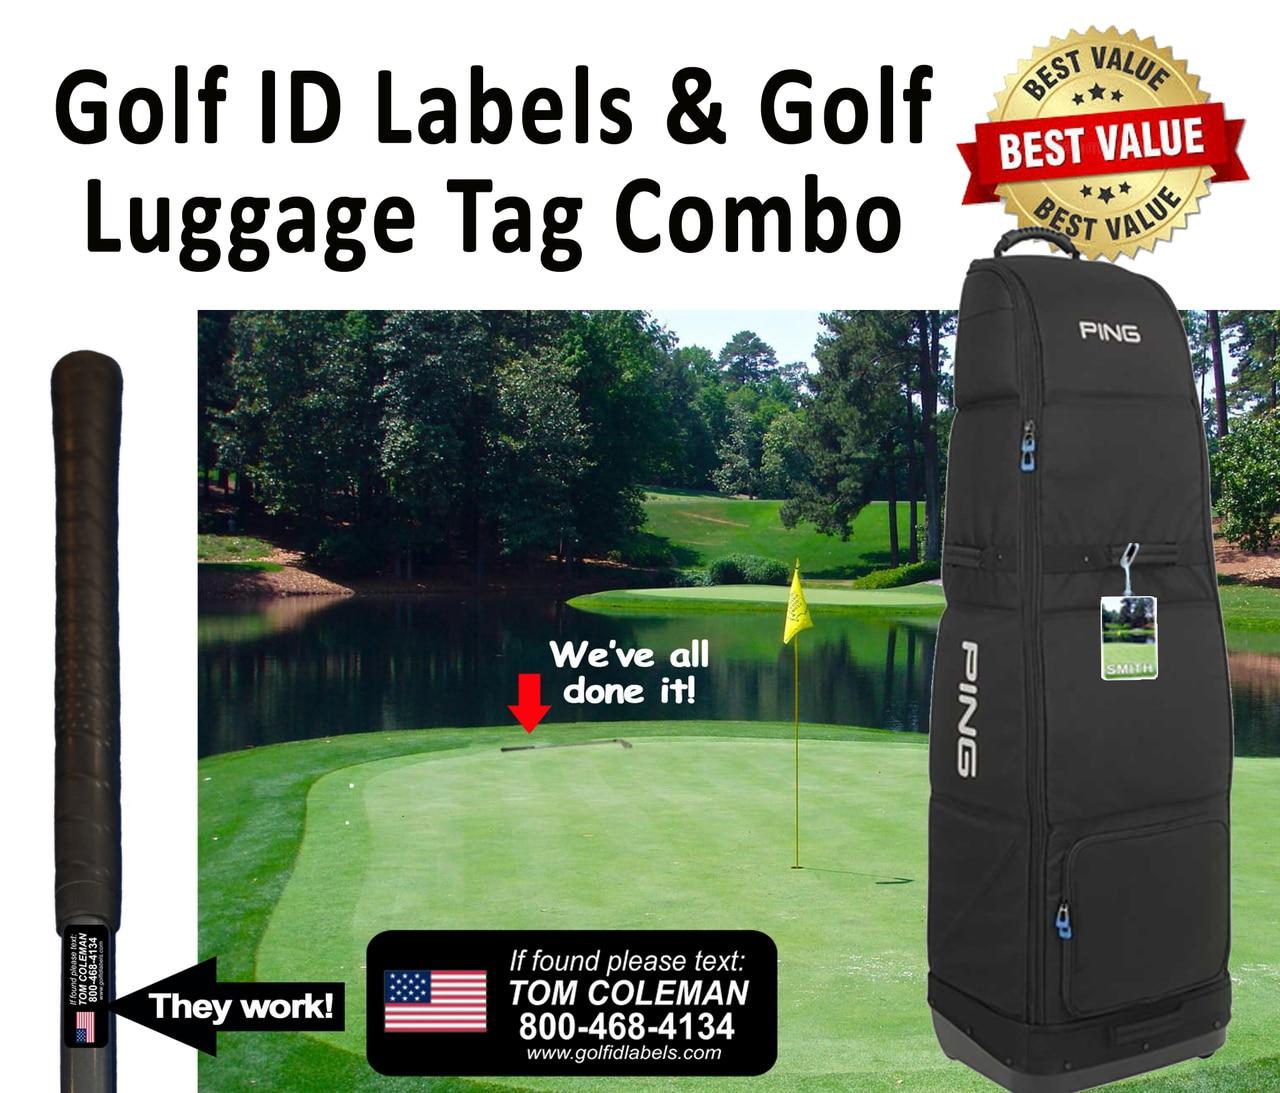 2 Golfer Combo | 2 Sets of Golf ID Decals & 2 Bag Tags Questions & Answers